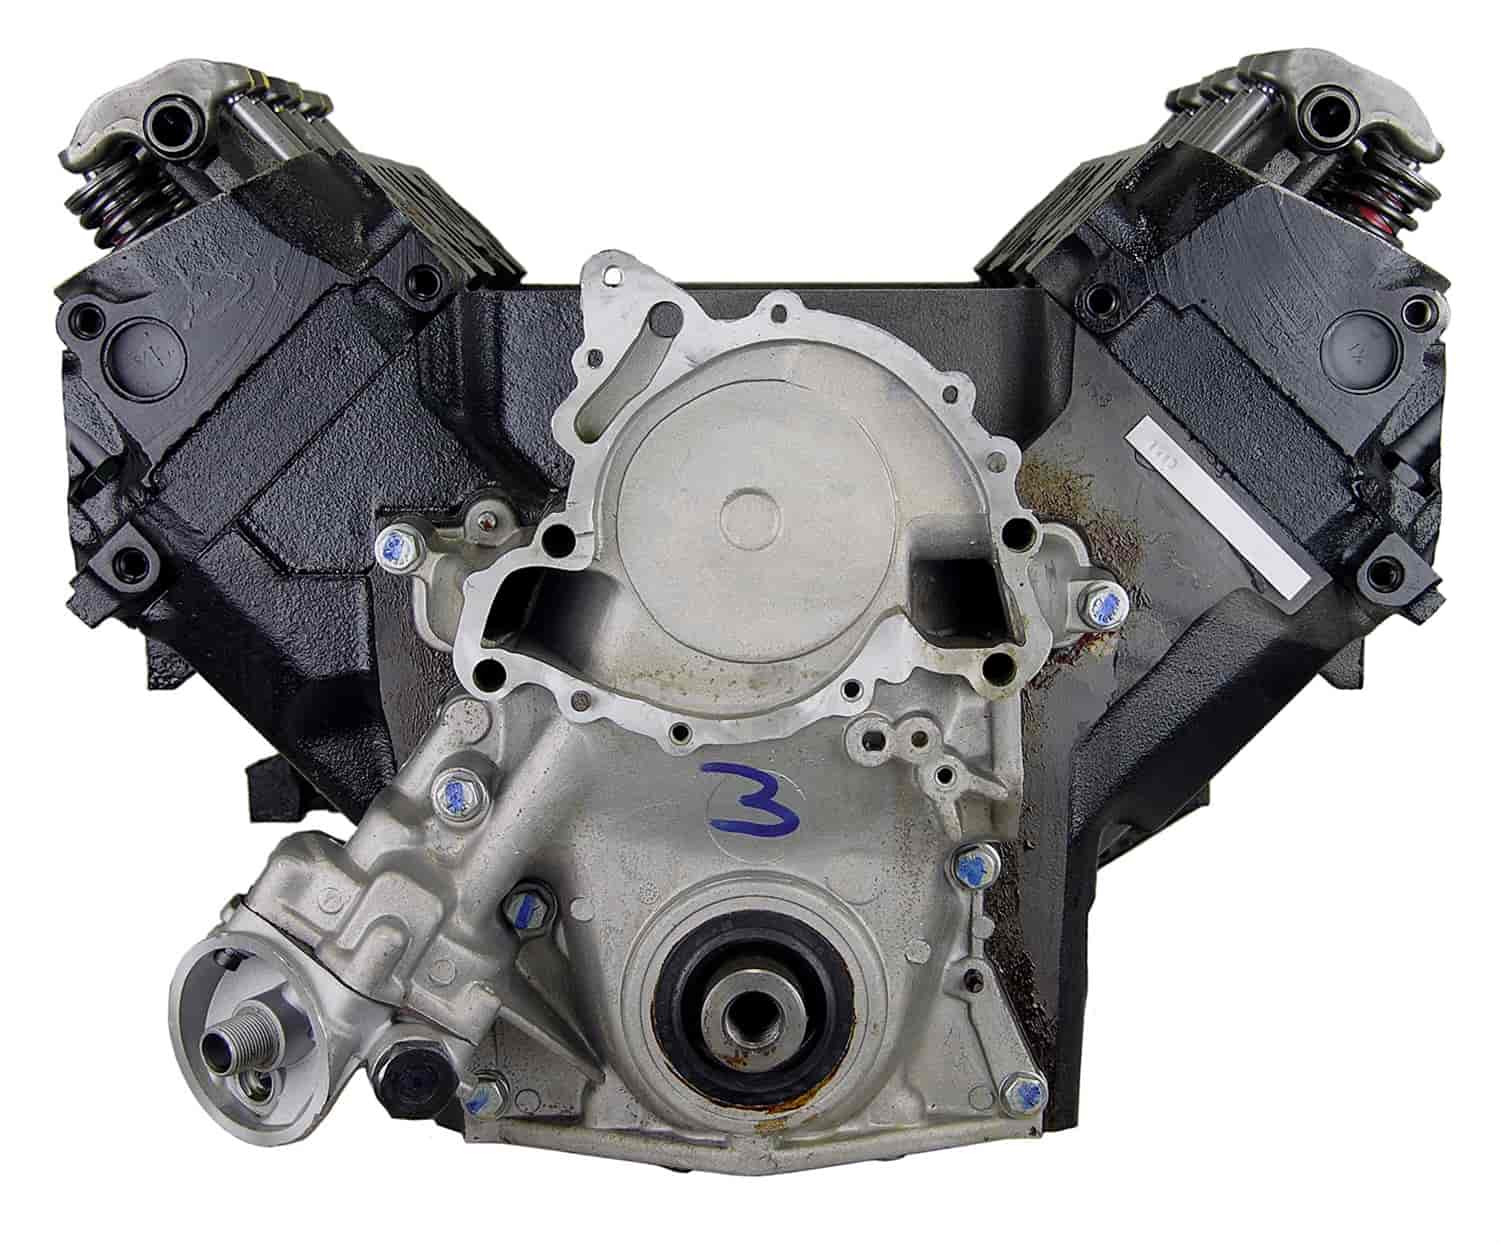 Remanufactured Crate Engine for 1978-1984 Chevy/Buick with 3.8L Turbo V6